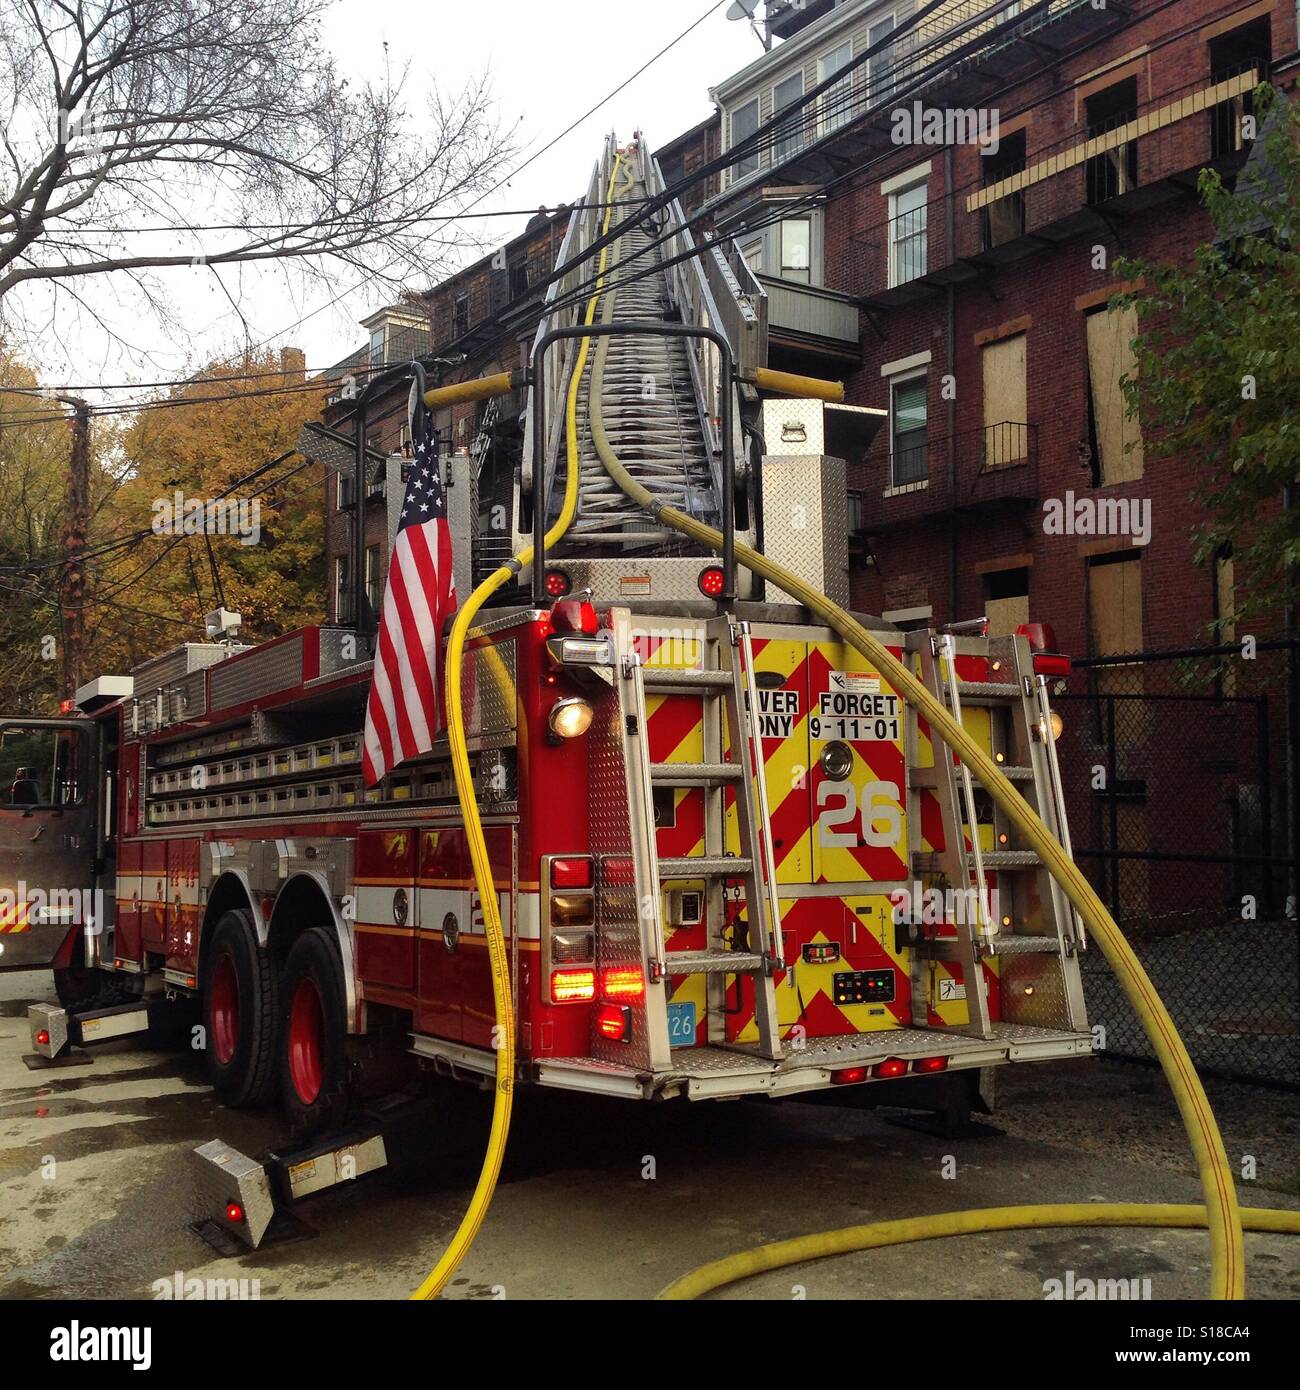 Boston fire department at the scene of a fire in the South End neighborhood of Boston Stock Photo